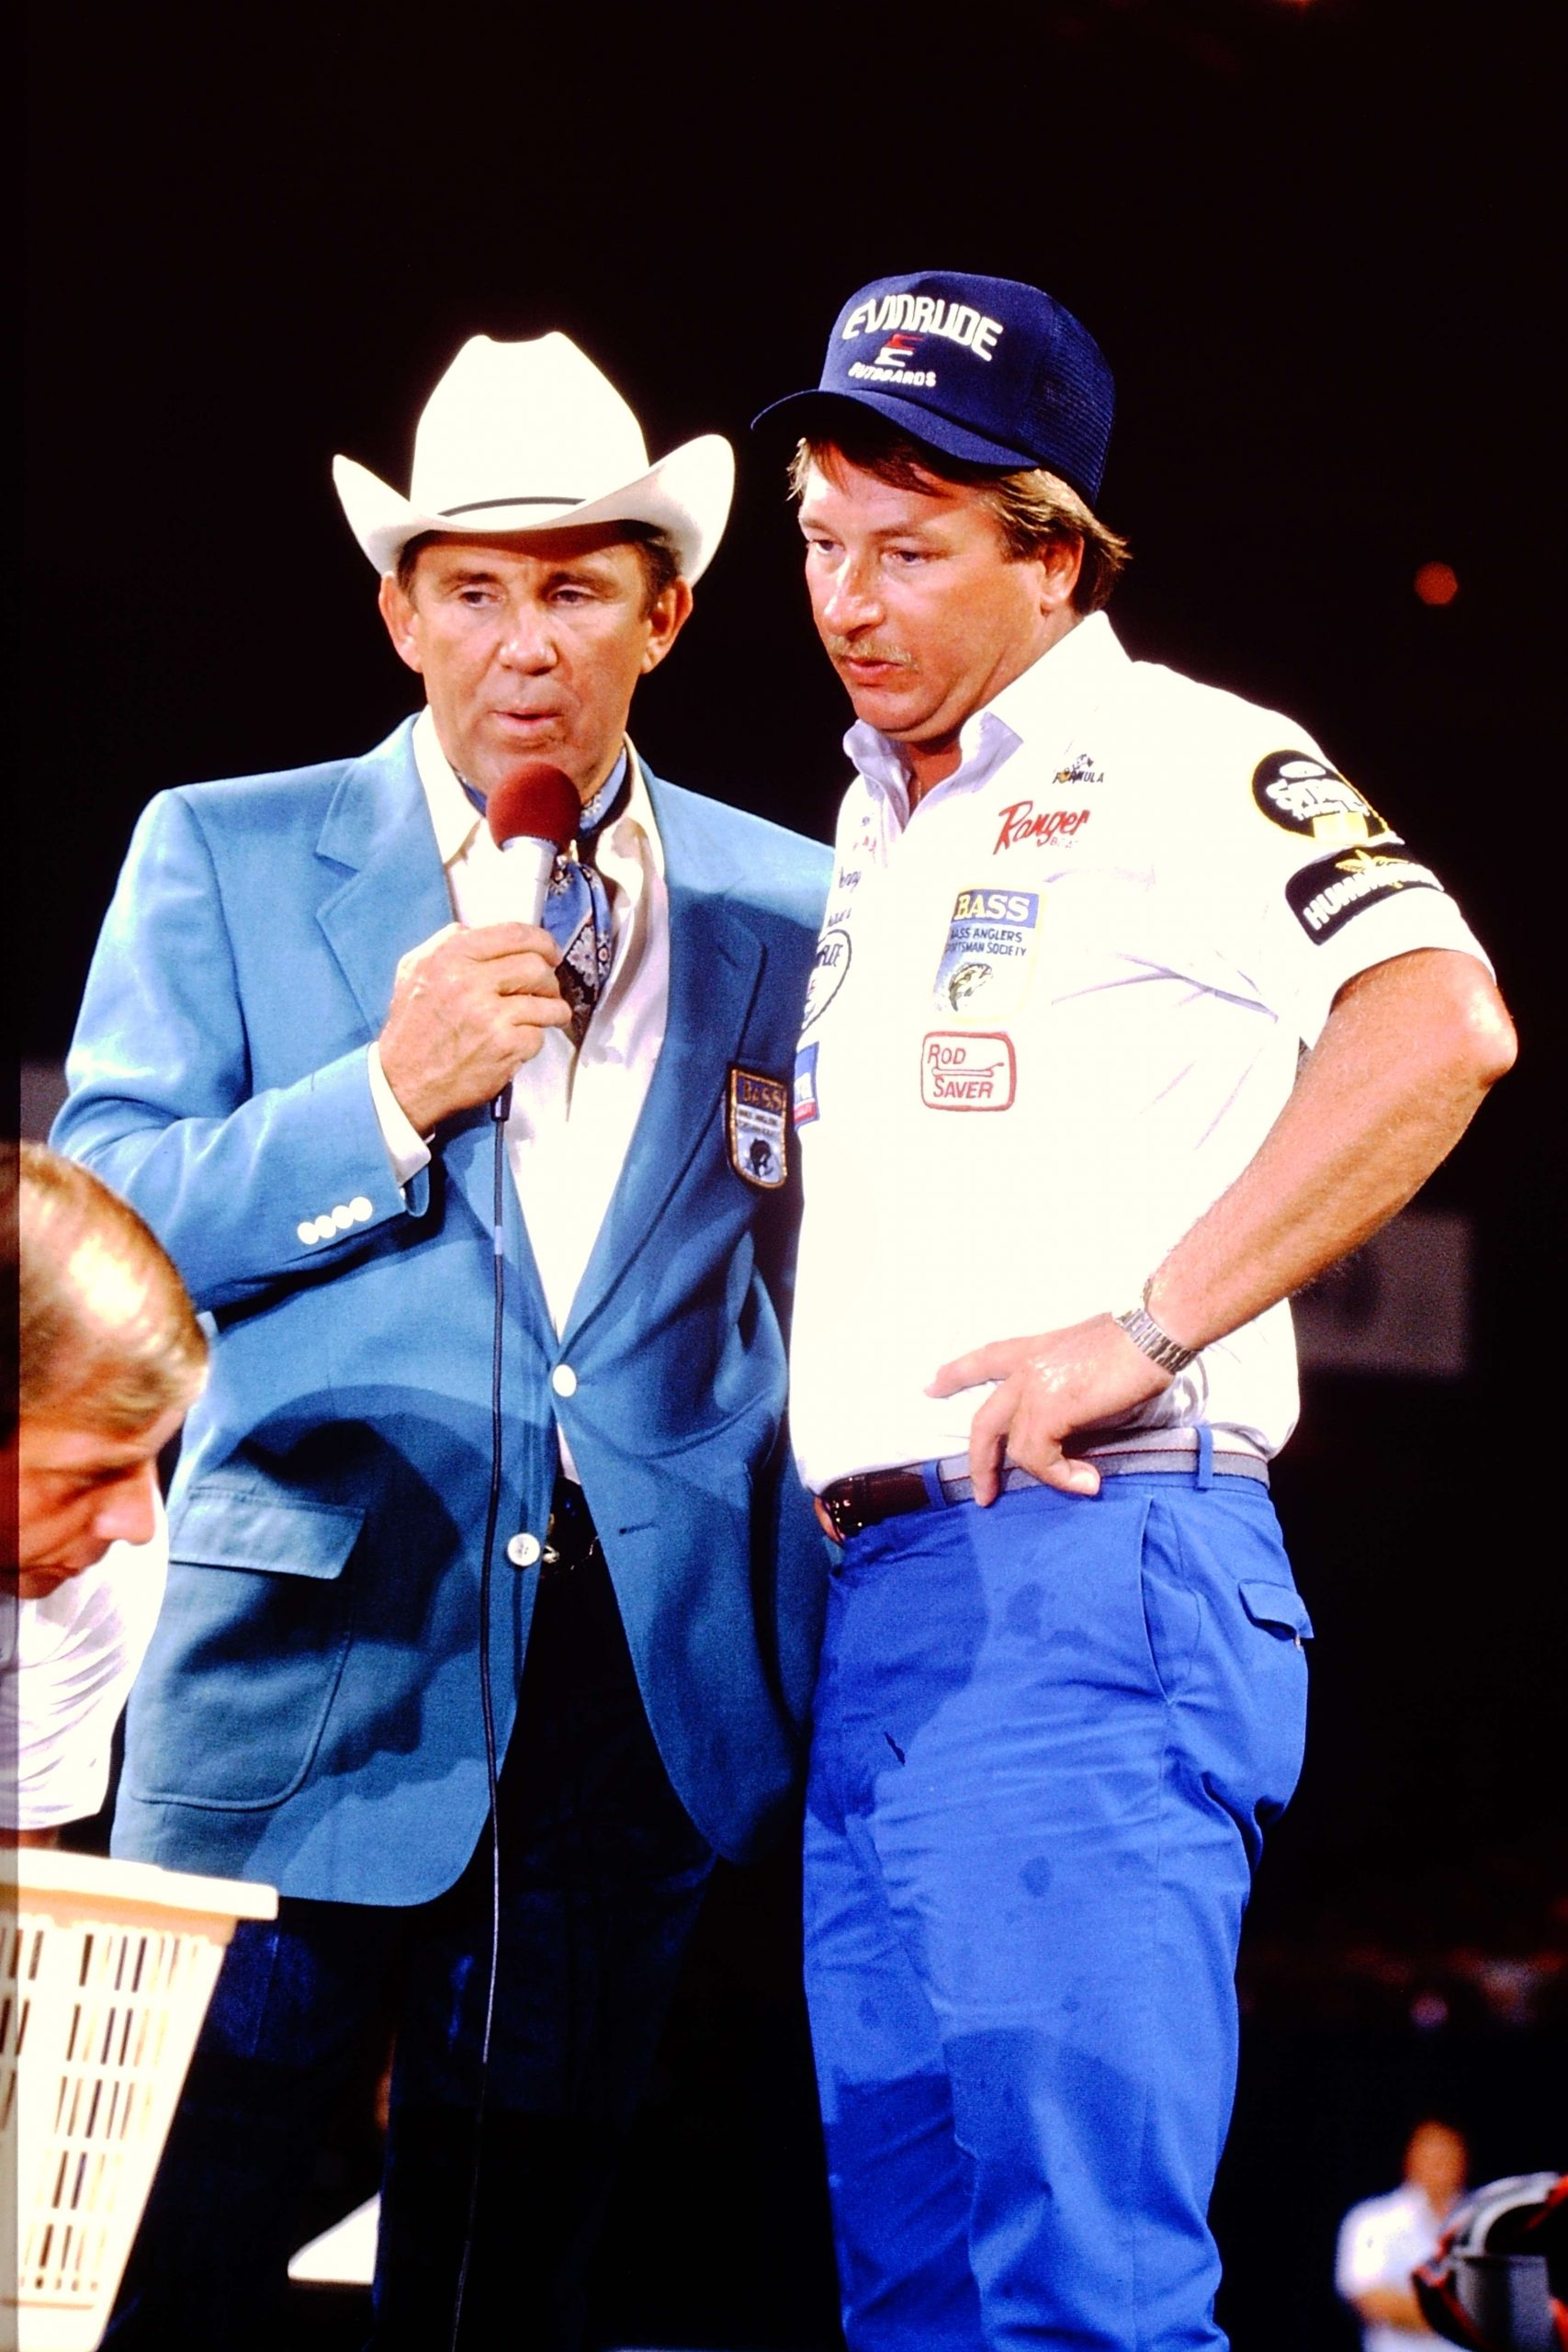 <b>1987</b><br>Brauer left little doubt he would be a force to be reckoned with for years. He added a Classic title in 1998 and ranks highly in B.A.S.S. records with 17 tournament wins and more than $2.5 million in earnings.